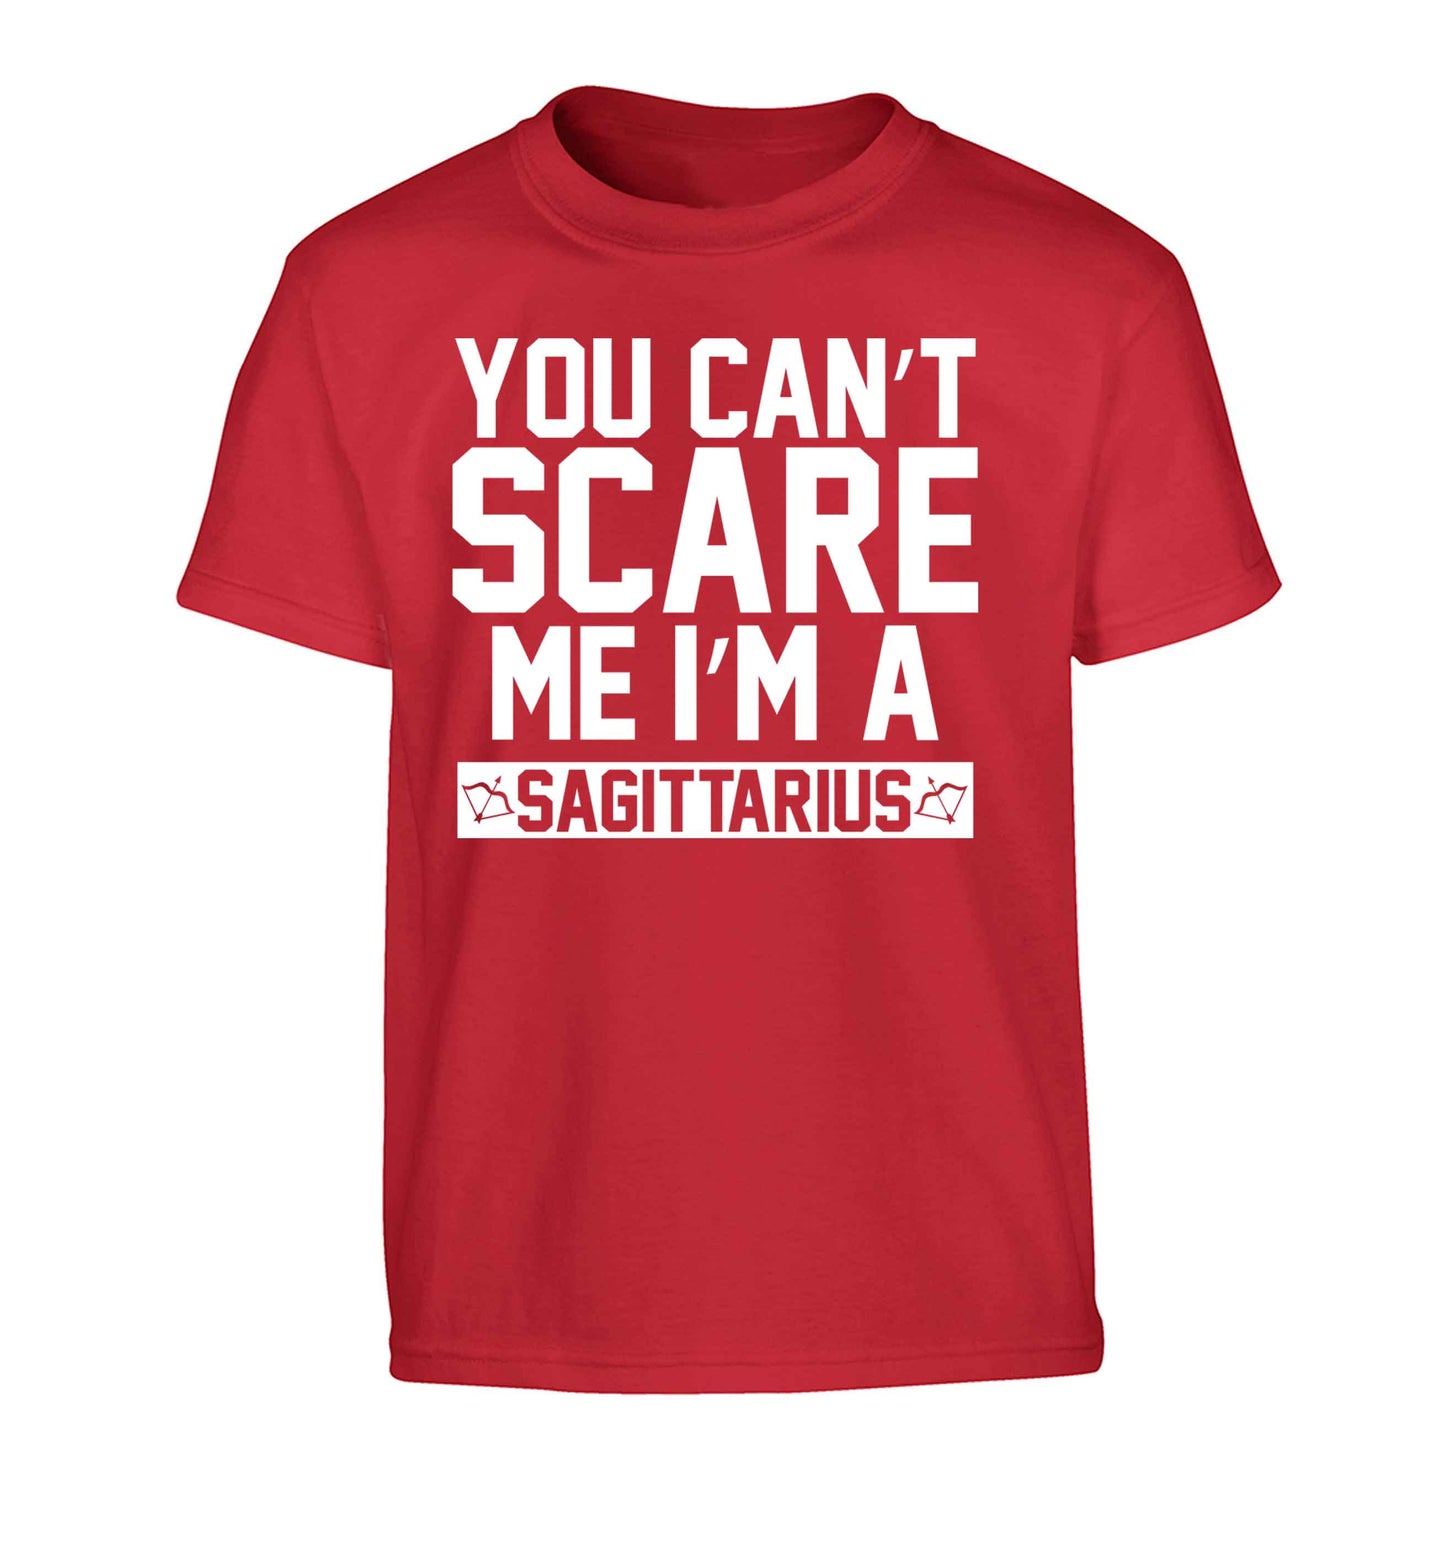 You can't scare me I'm a sagittarius Children's red Tshirt 12-13 Years